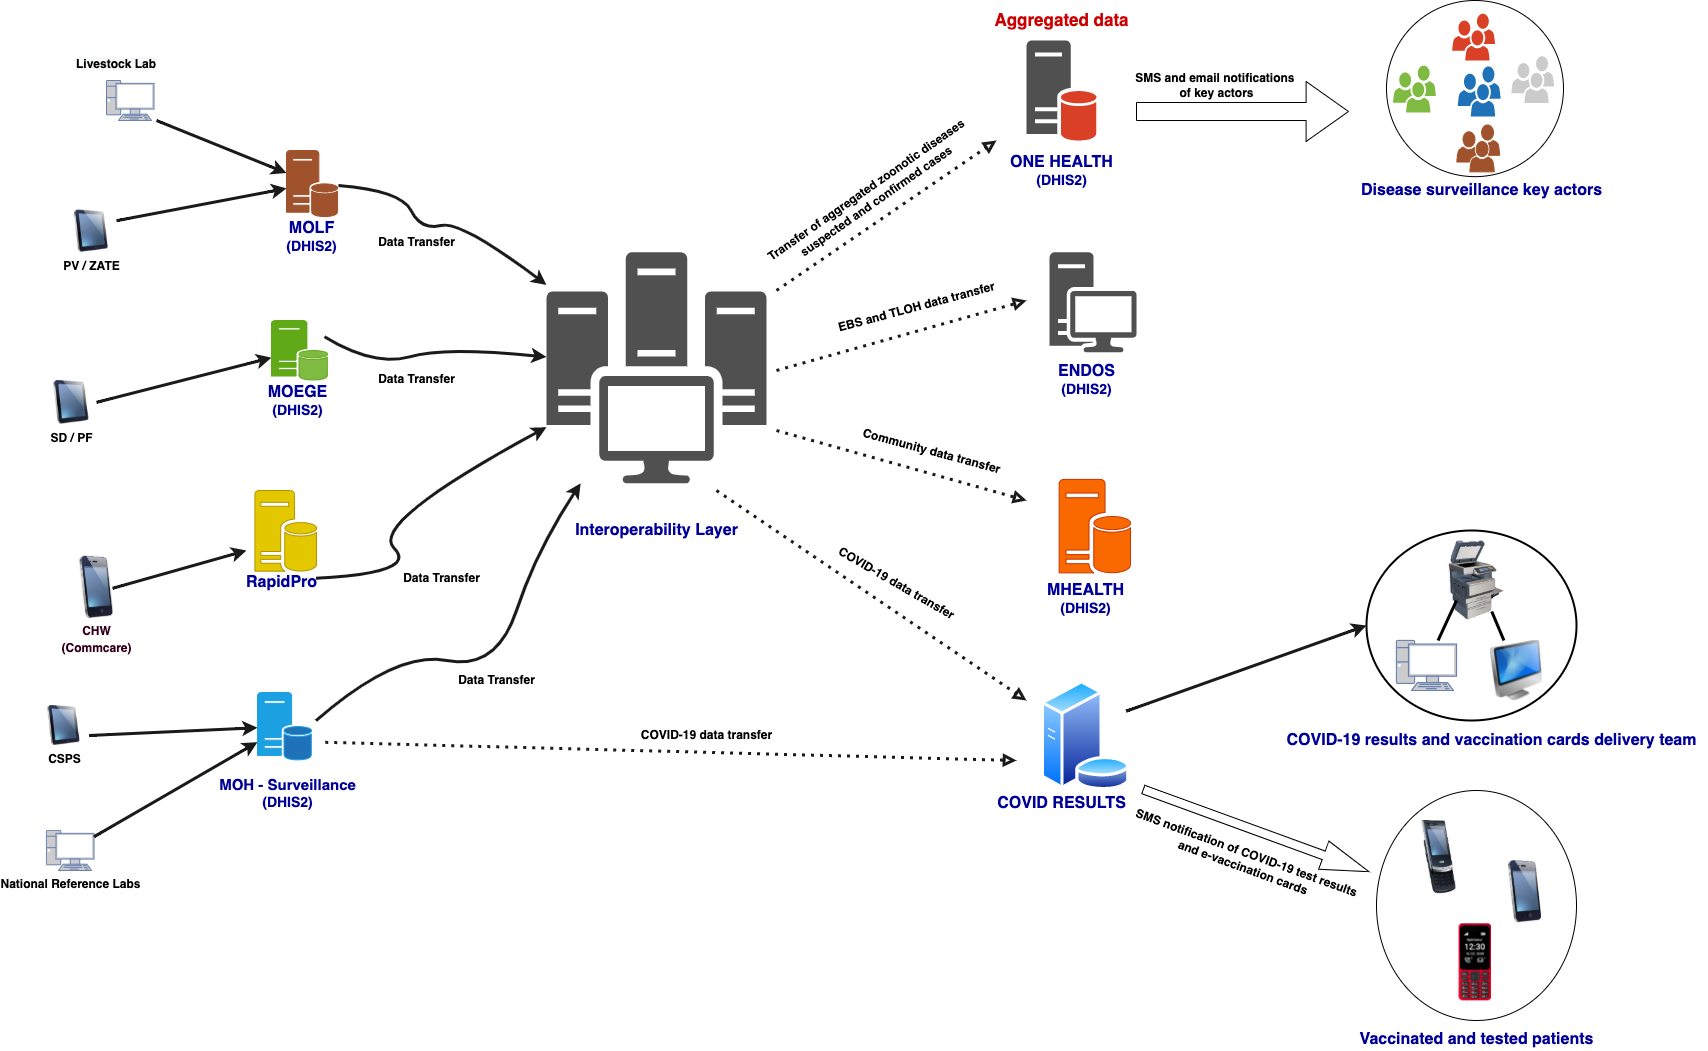 Click to view larger: diagram showing interoperability layer